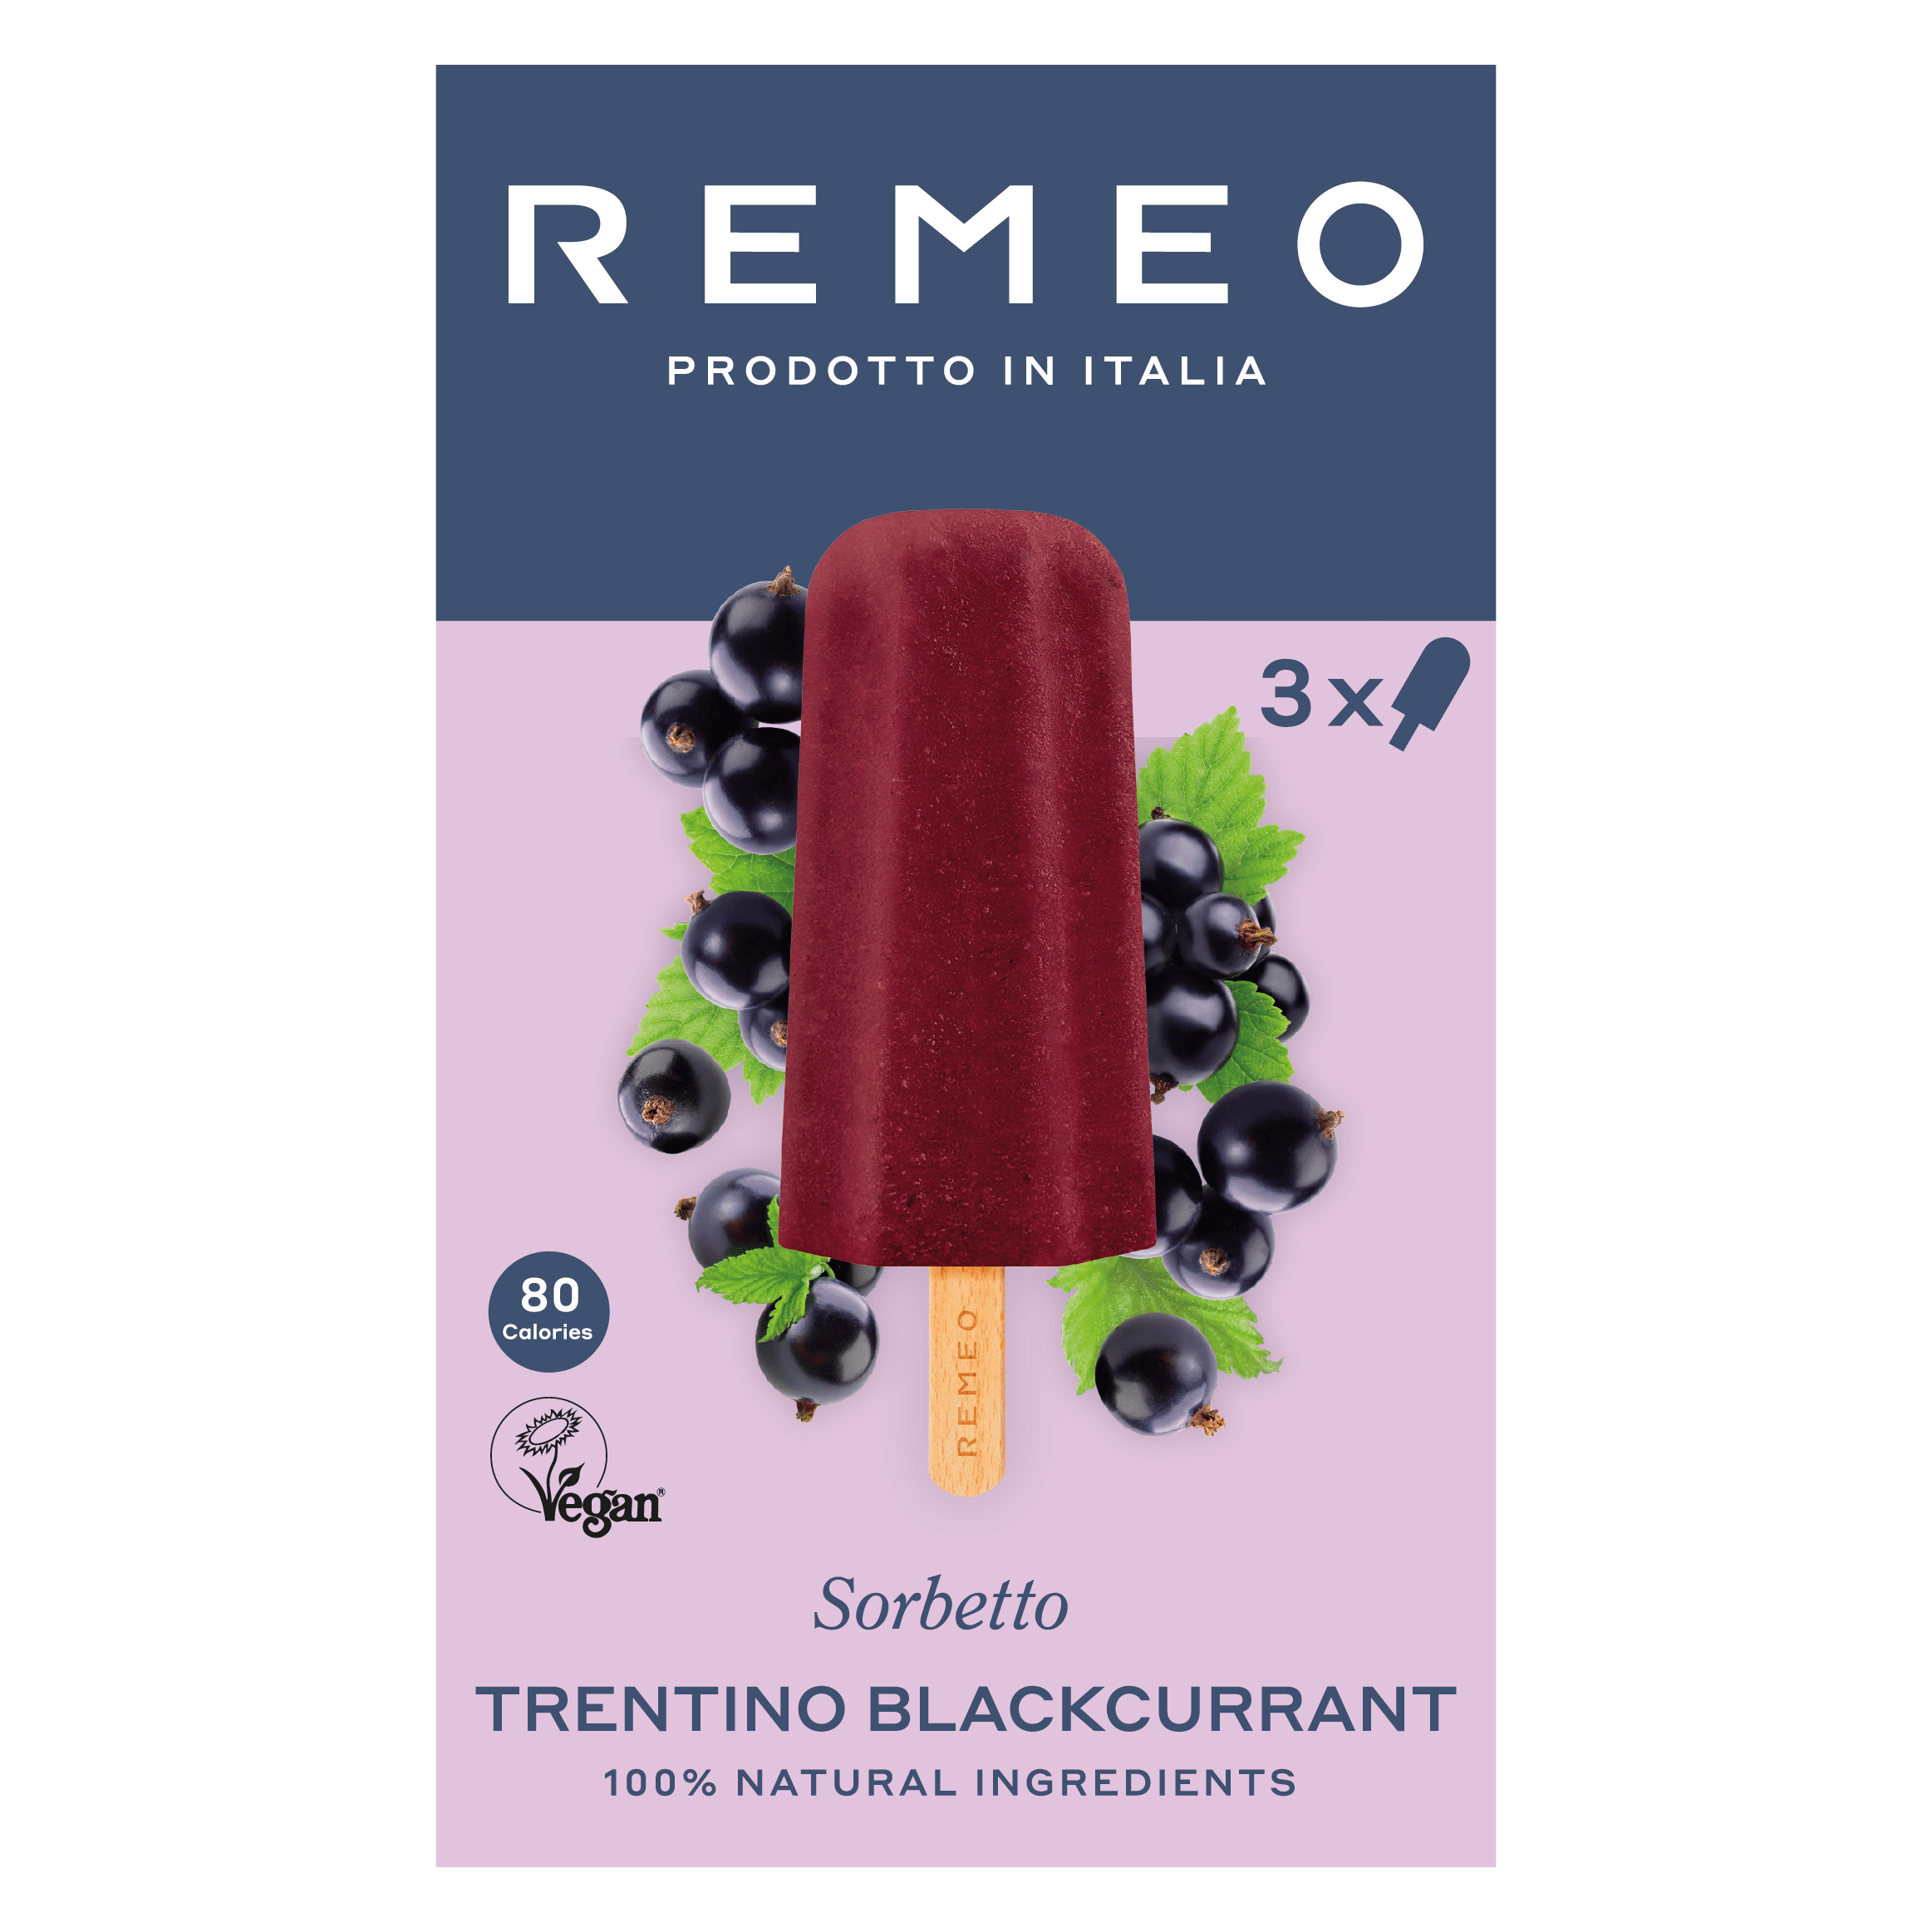 Blackcurrant Sorbet ice lolly by Remeo Gelato